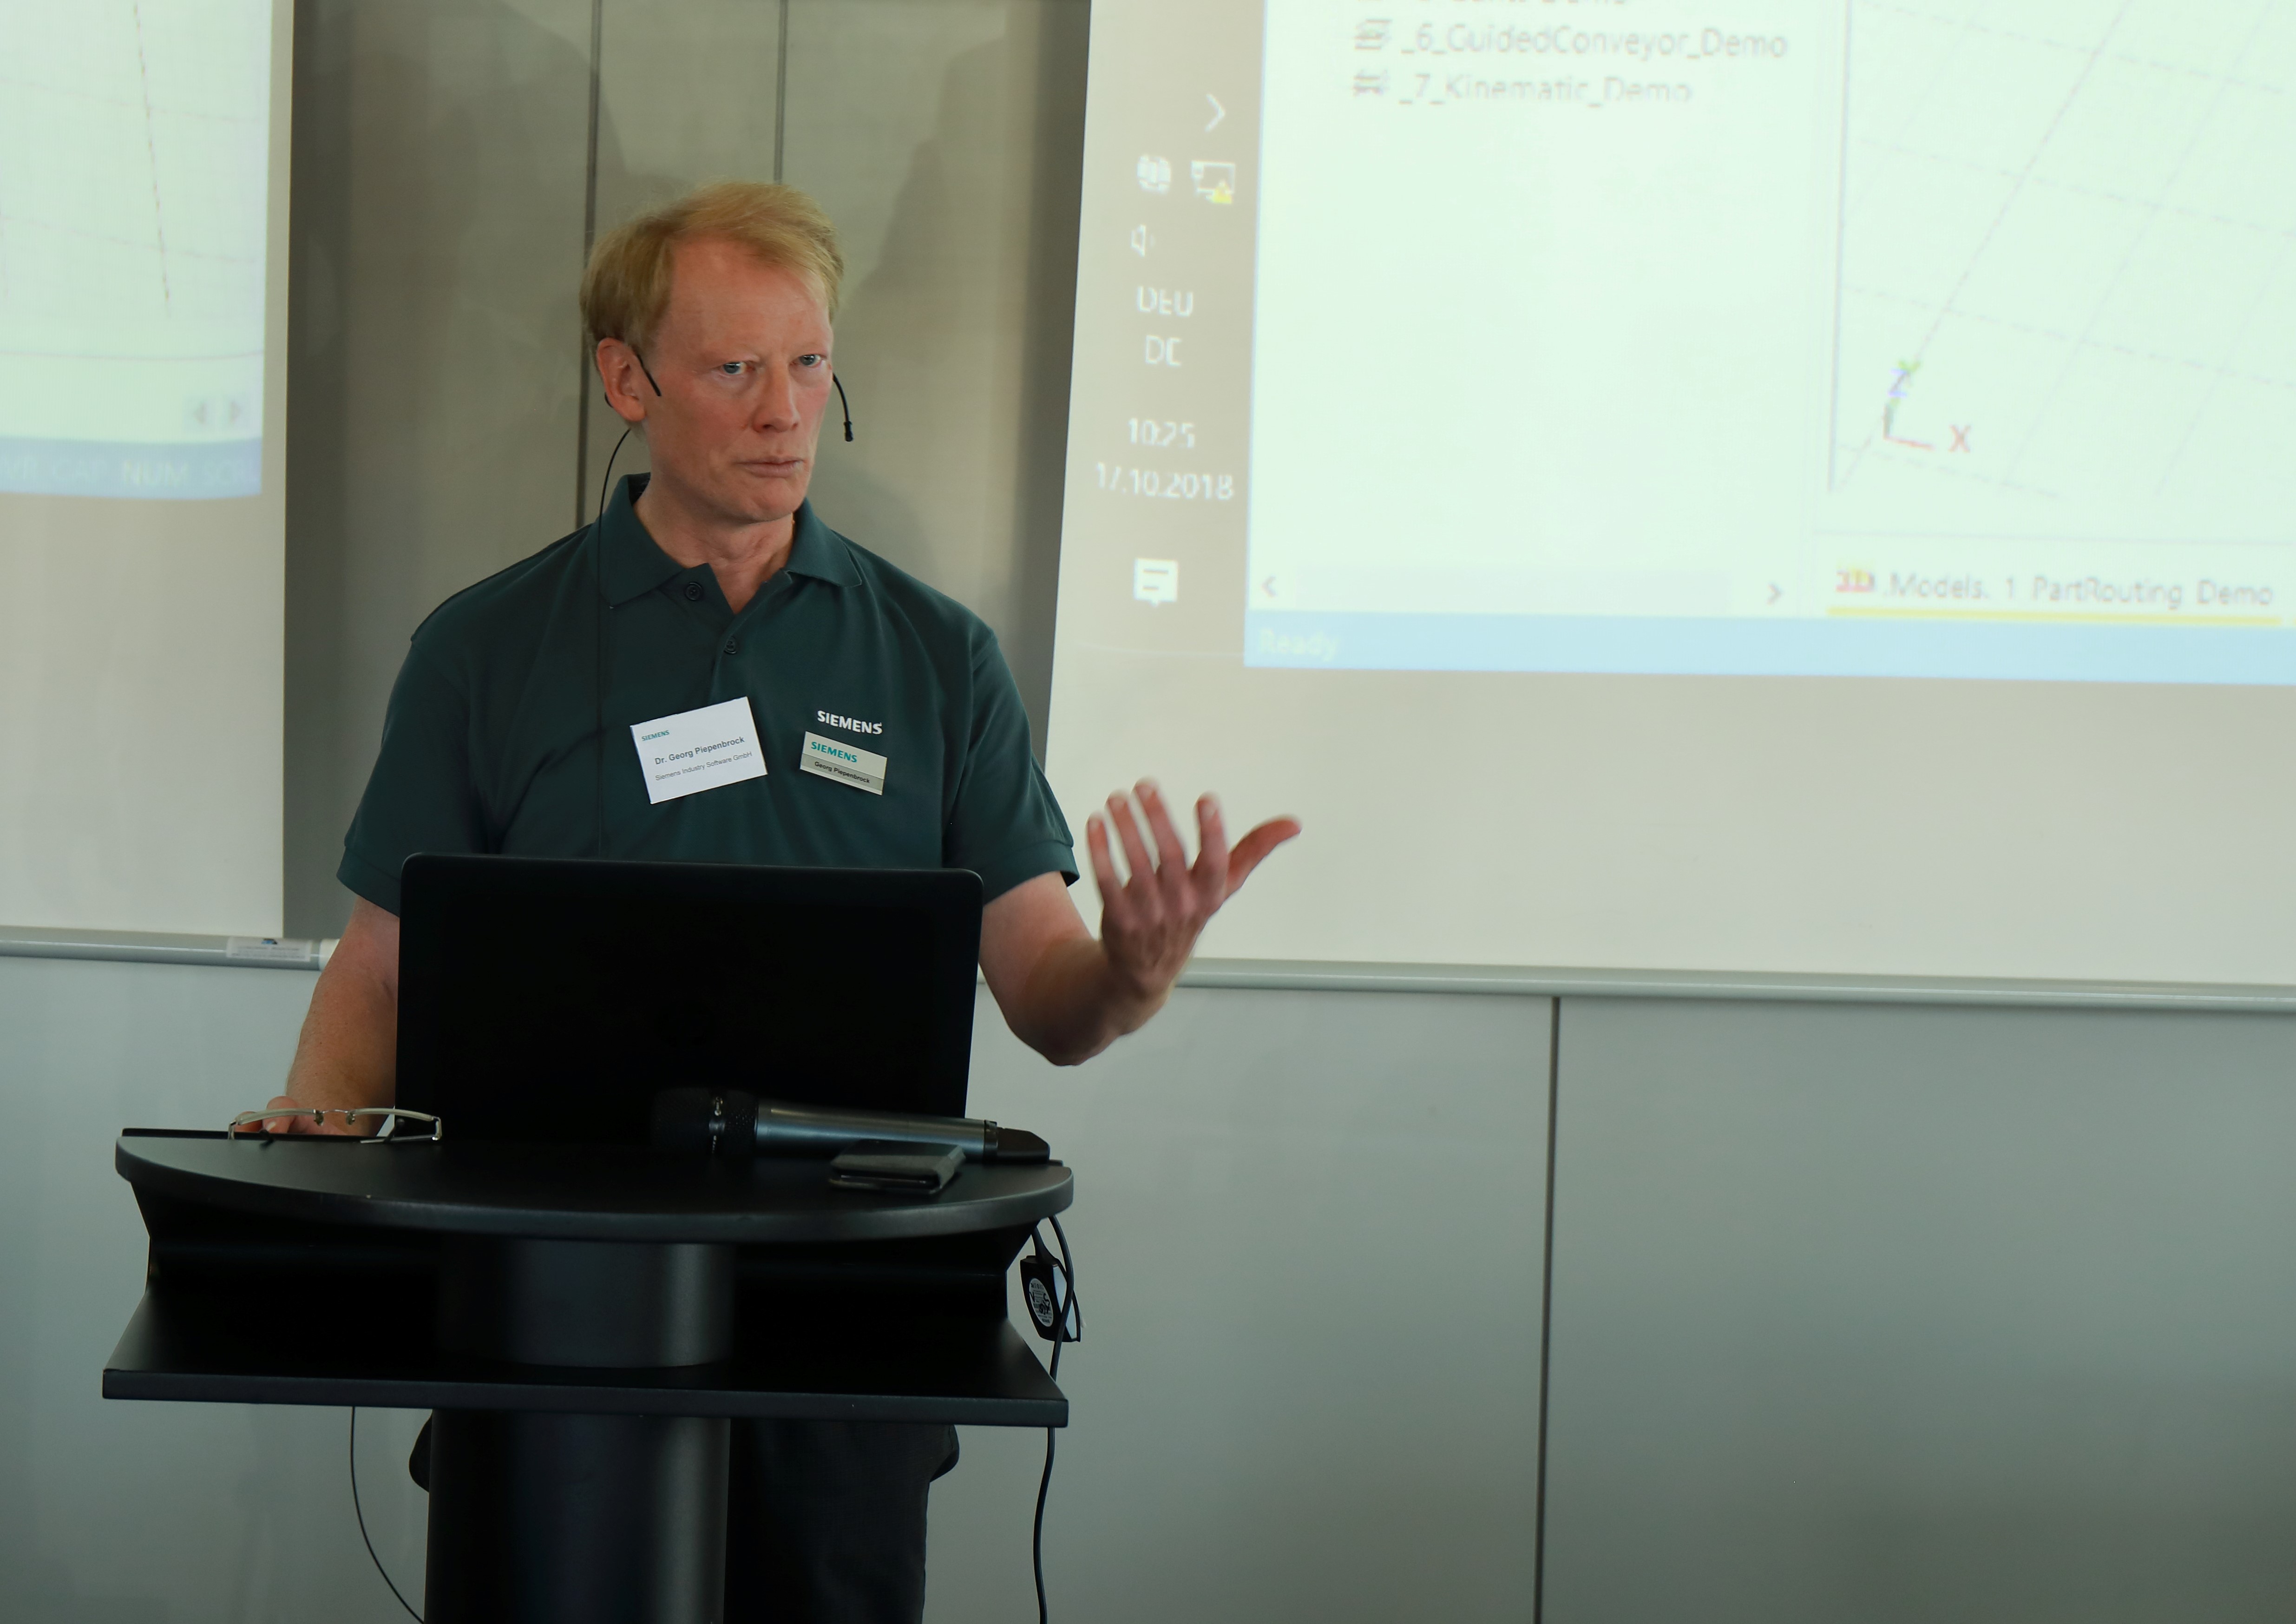 Georg presenting at 2018 Plant Simulation Worldwide User Conference.JPG